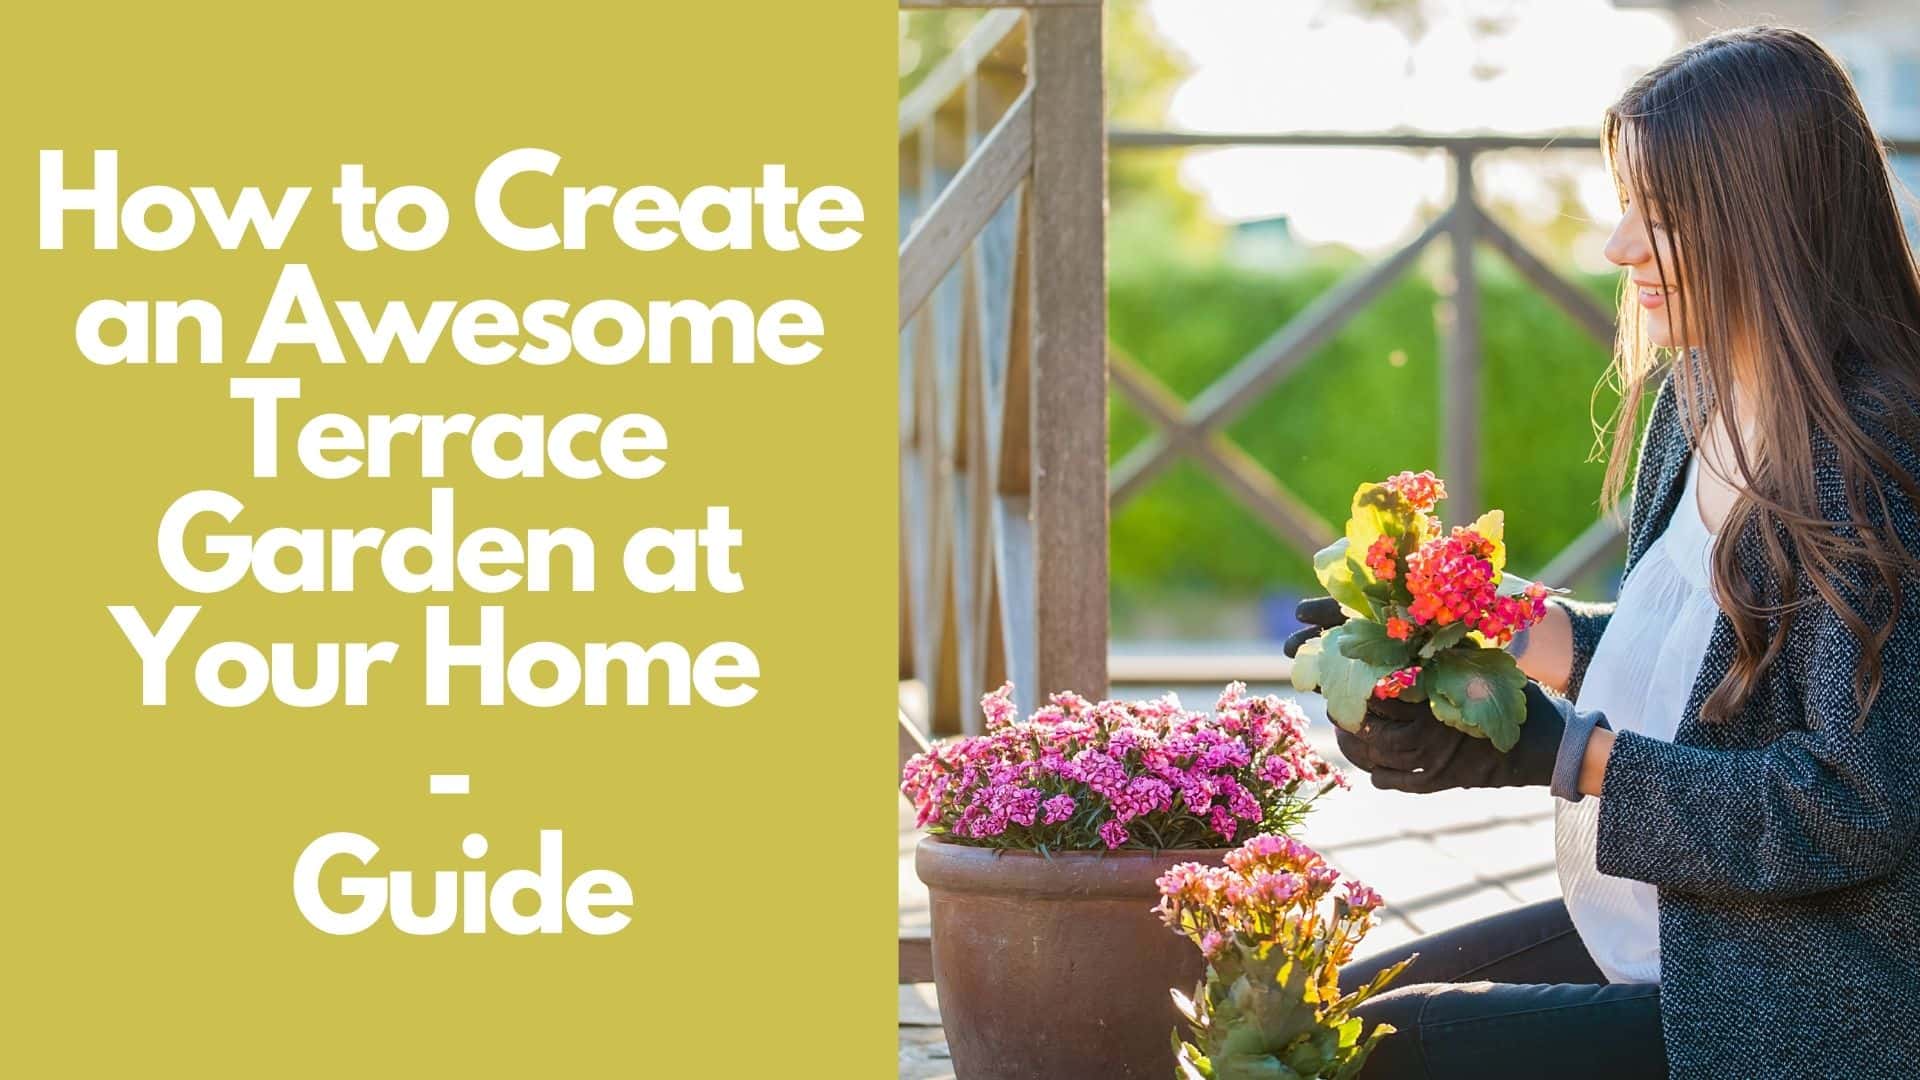 How to Make Your Own Terrace Garden at Home? | A - Z Guide